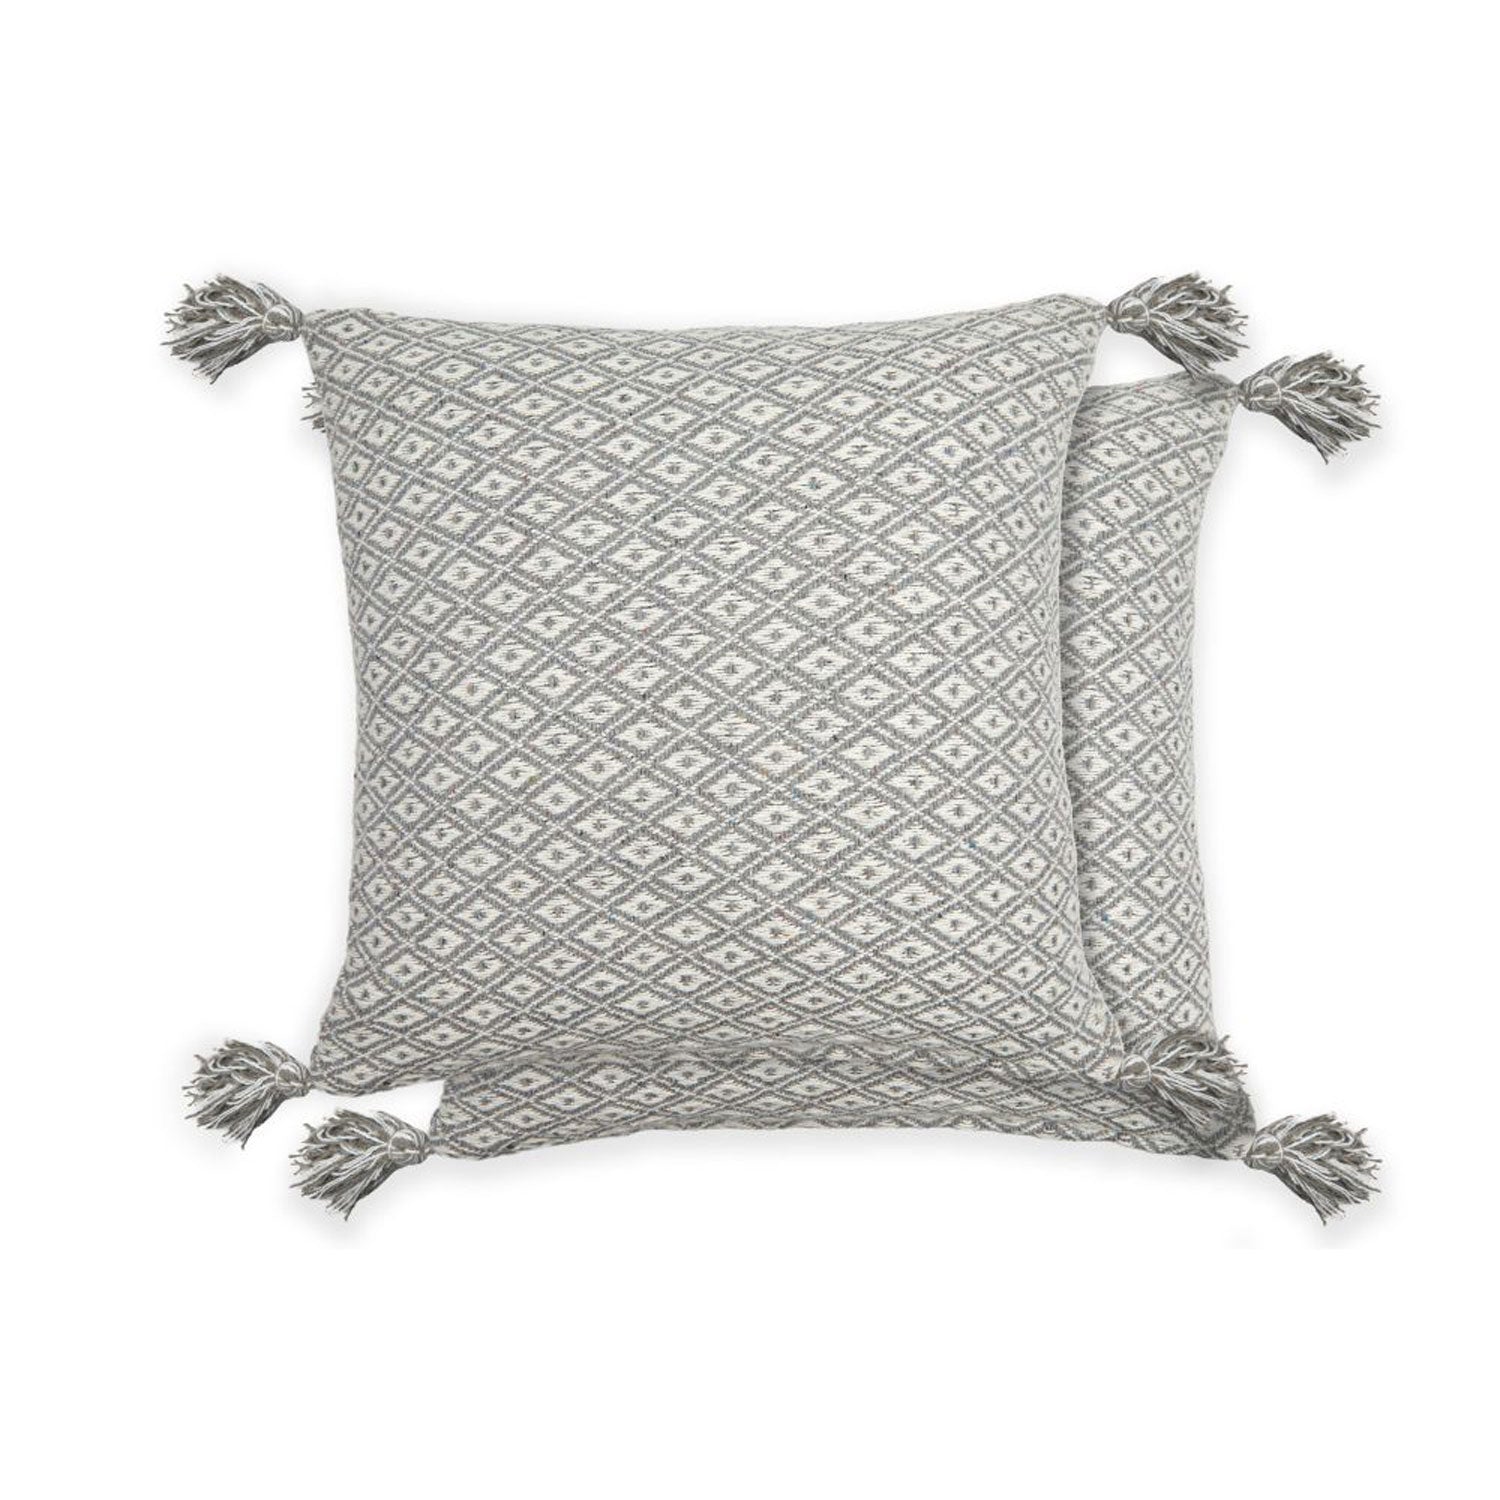 The Home Living Room Casablanca Cushion Cover - Silver 1 Shaws Department Stores